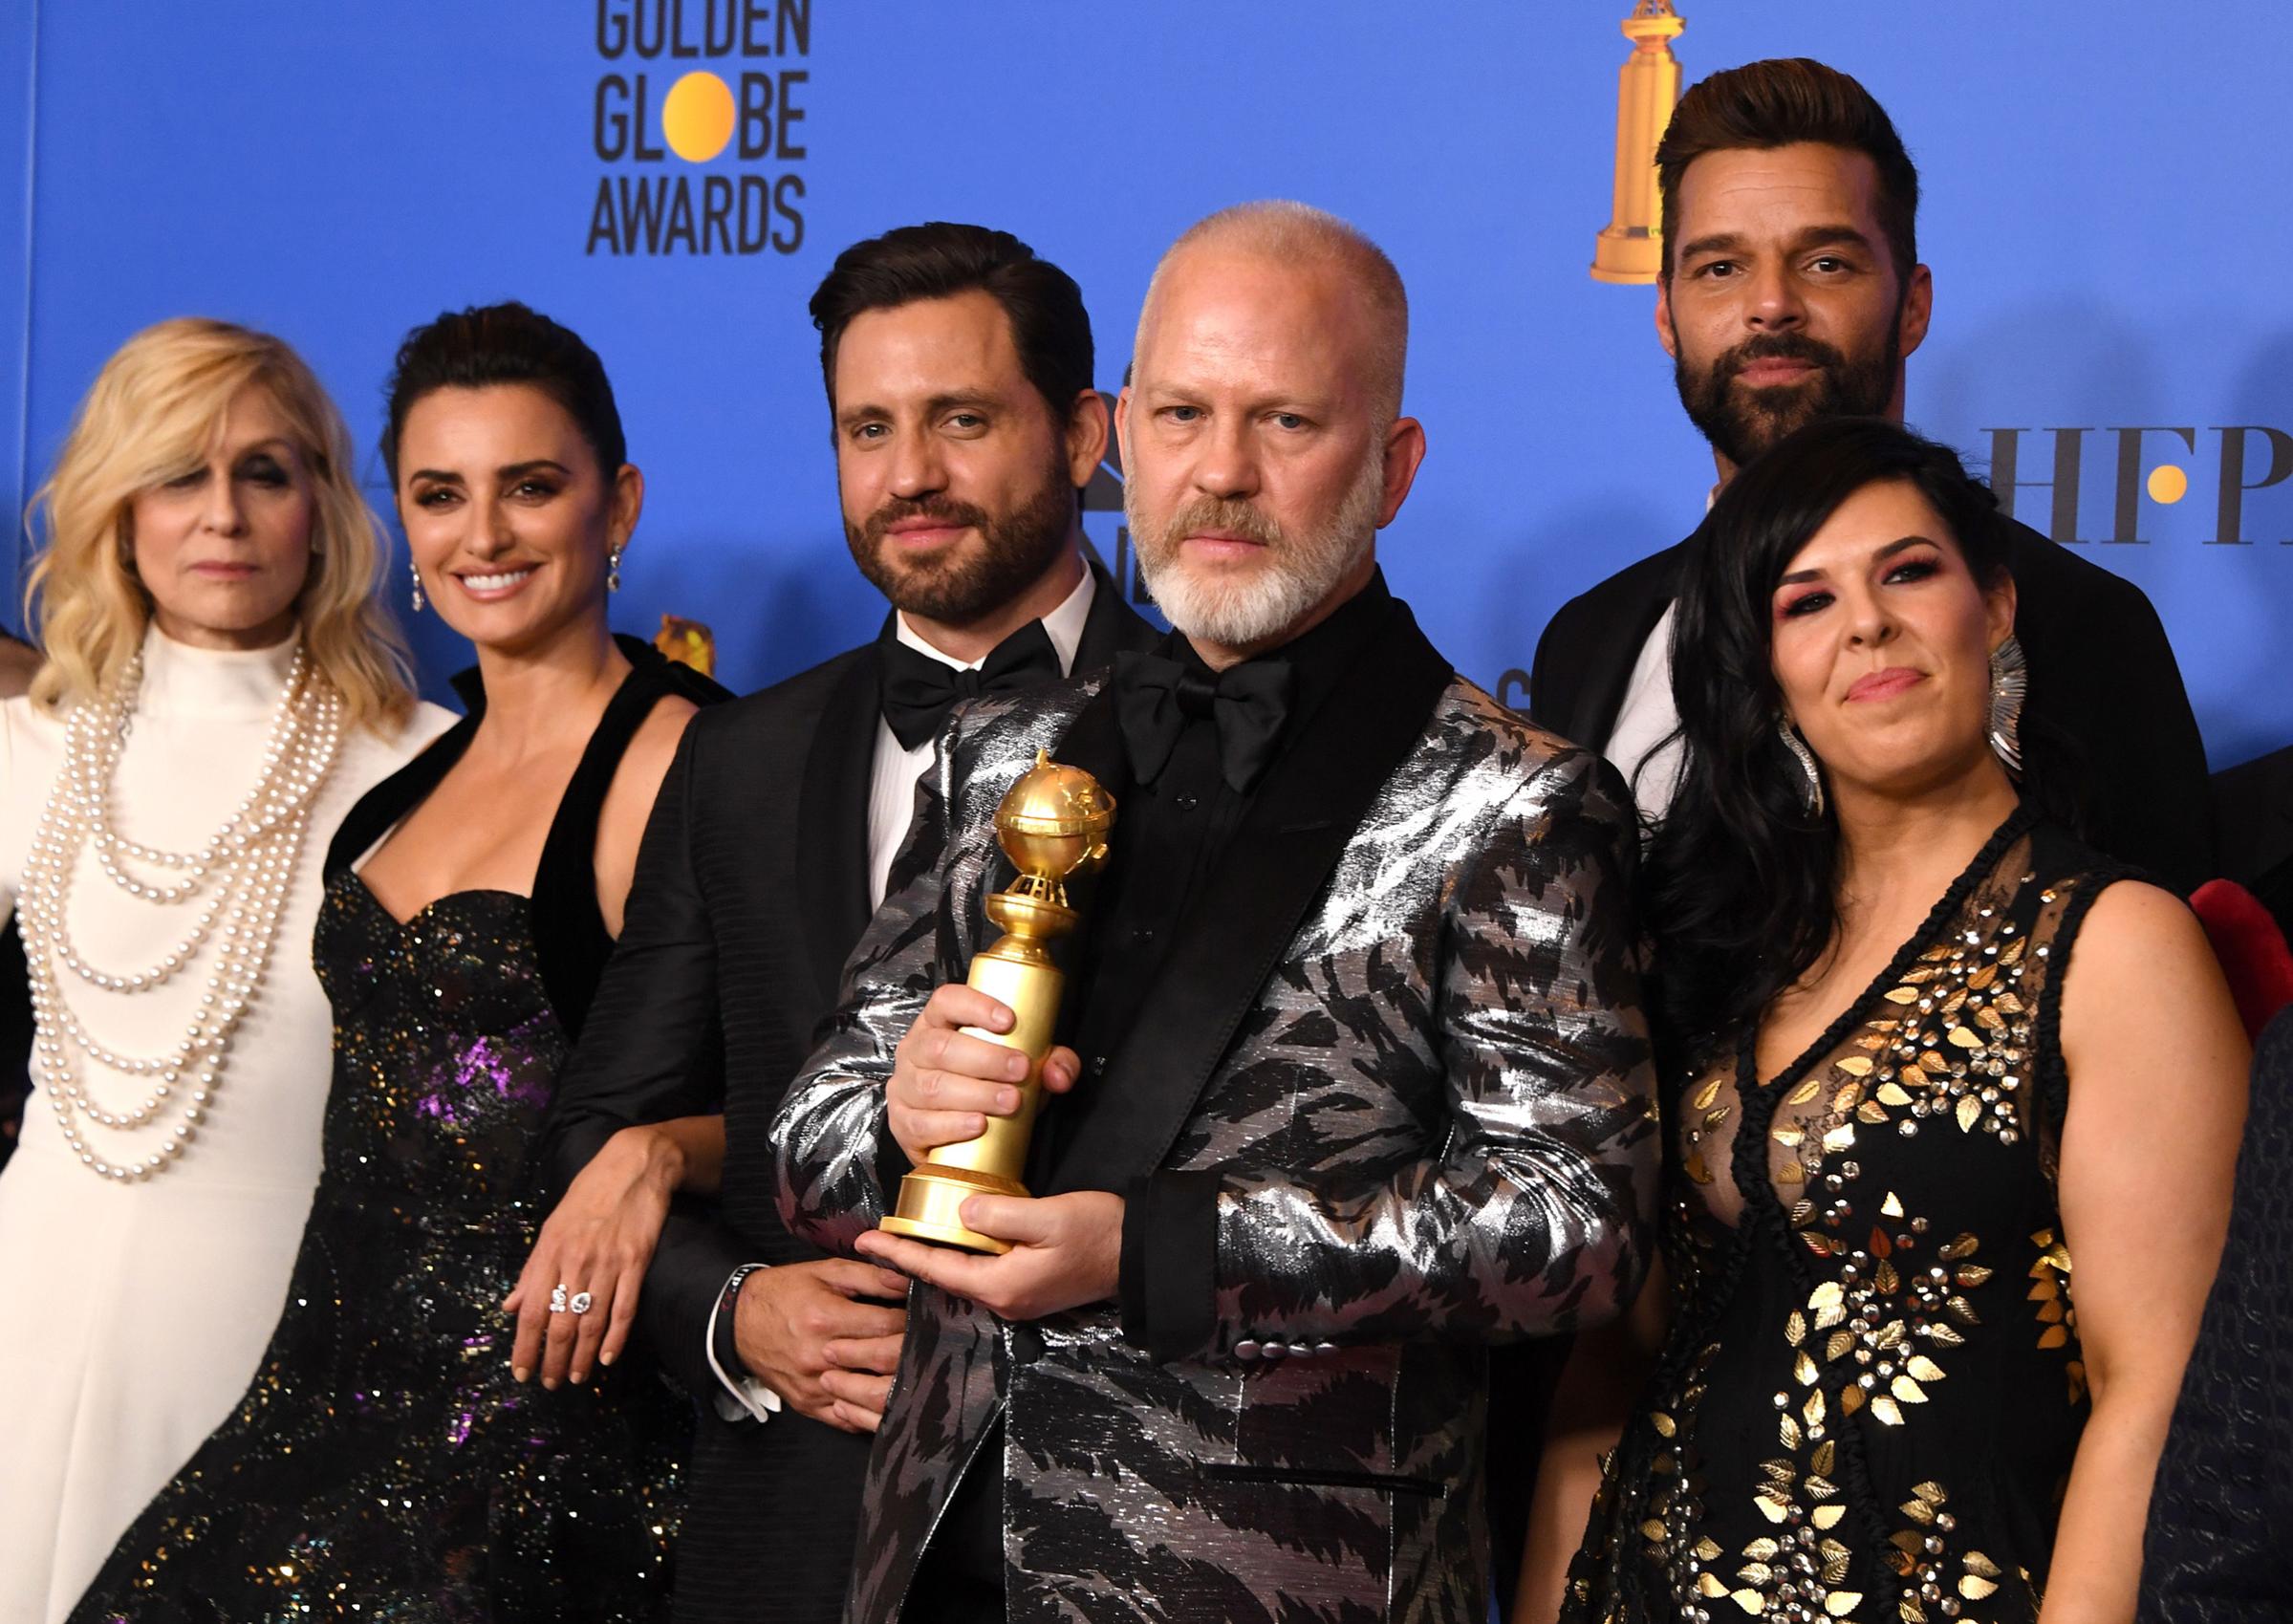 Best Limited Series or Motion Picture Made for Television "The Assassination of Gianni Versace" winners producer Ryan Murphy and actors Penelope Cruz, Edgar Ramirez, Ricky Martin pose with the award during the 76th annual Golden Globe Awards.